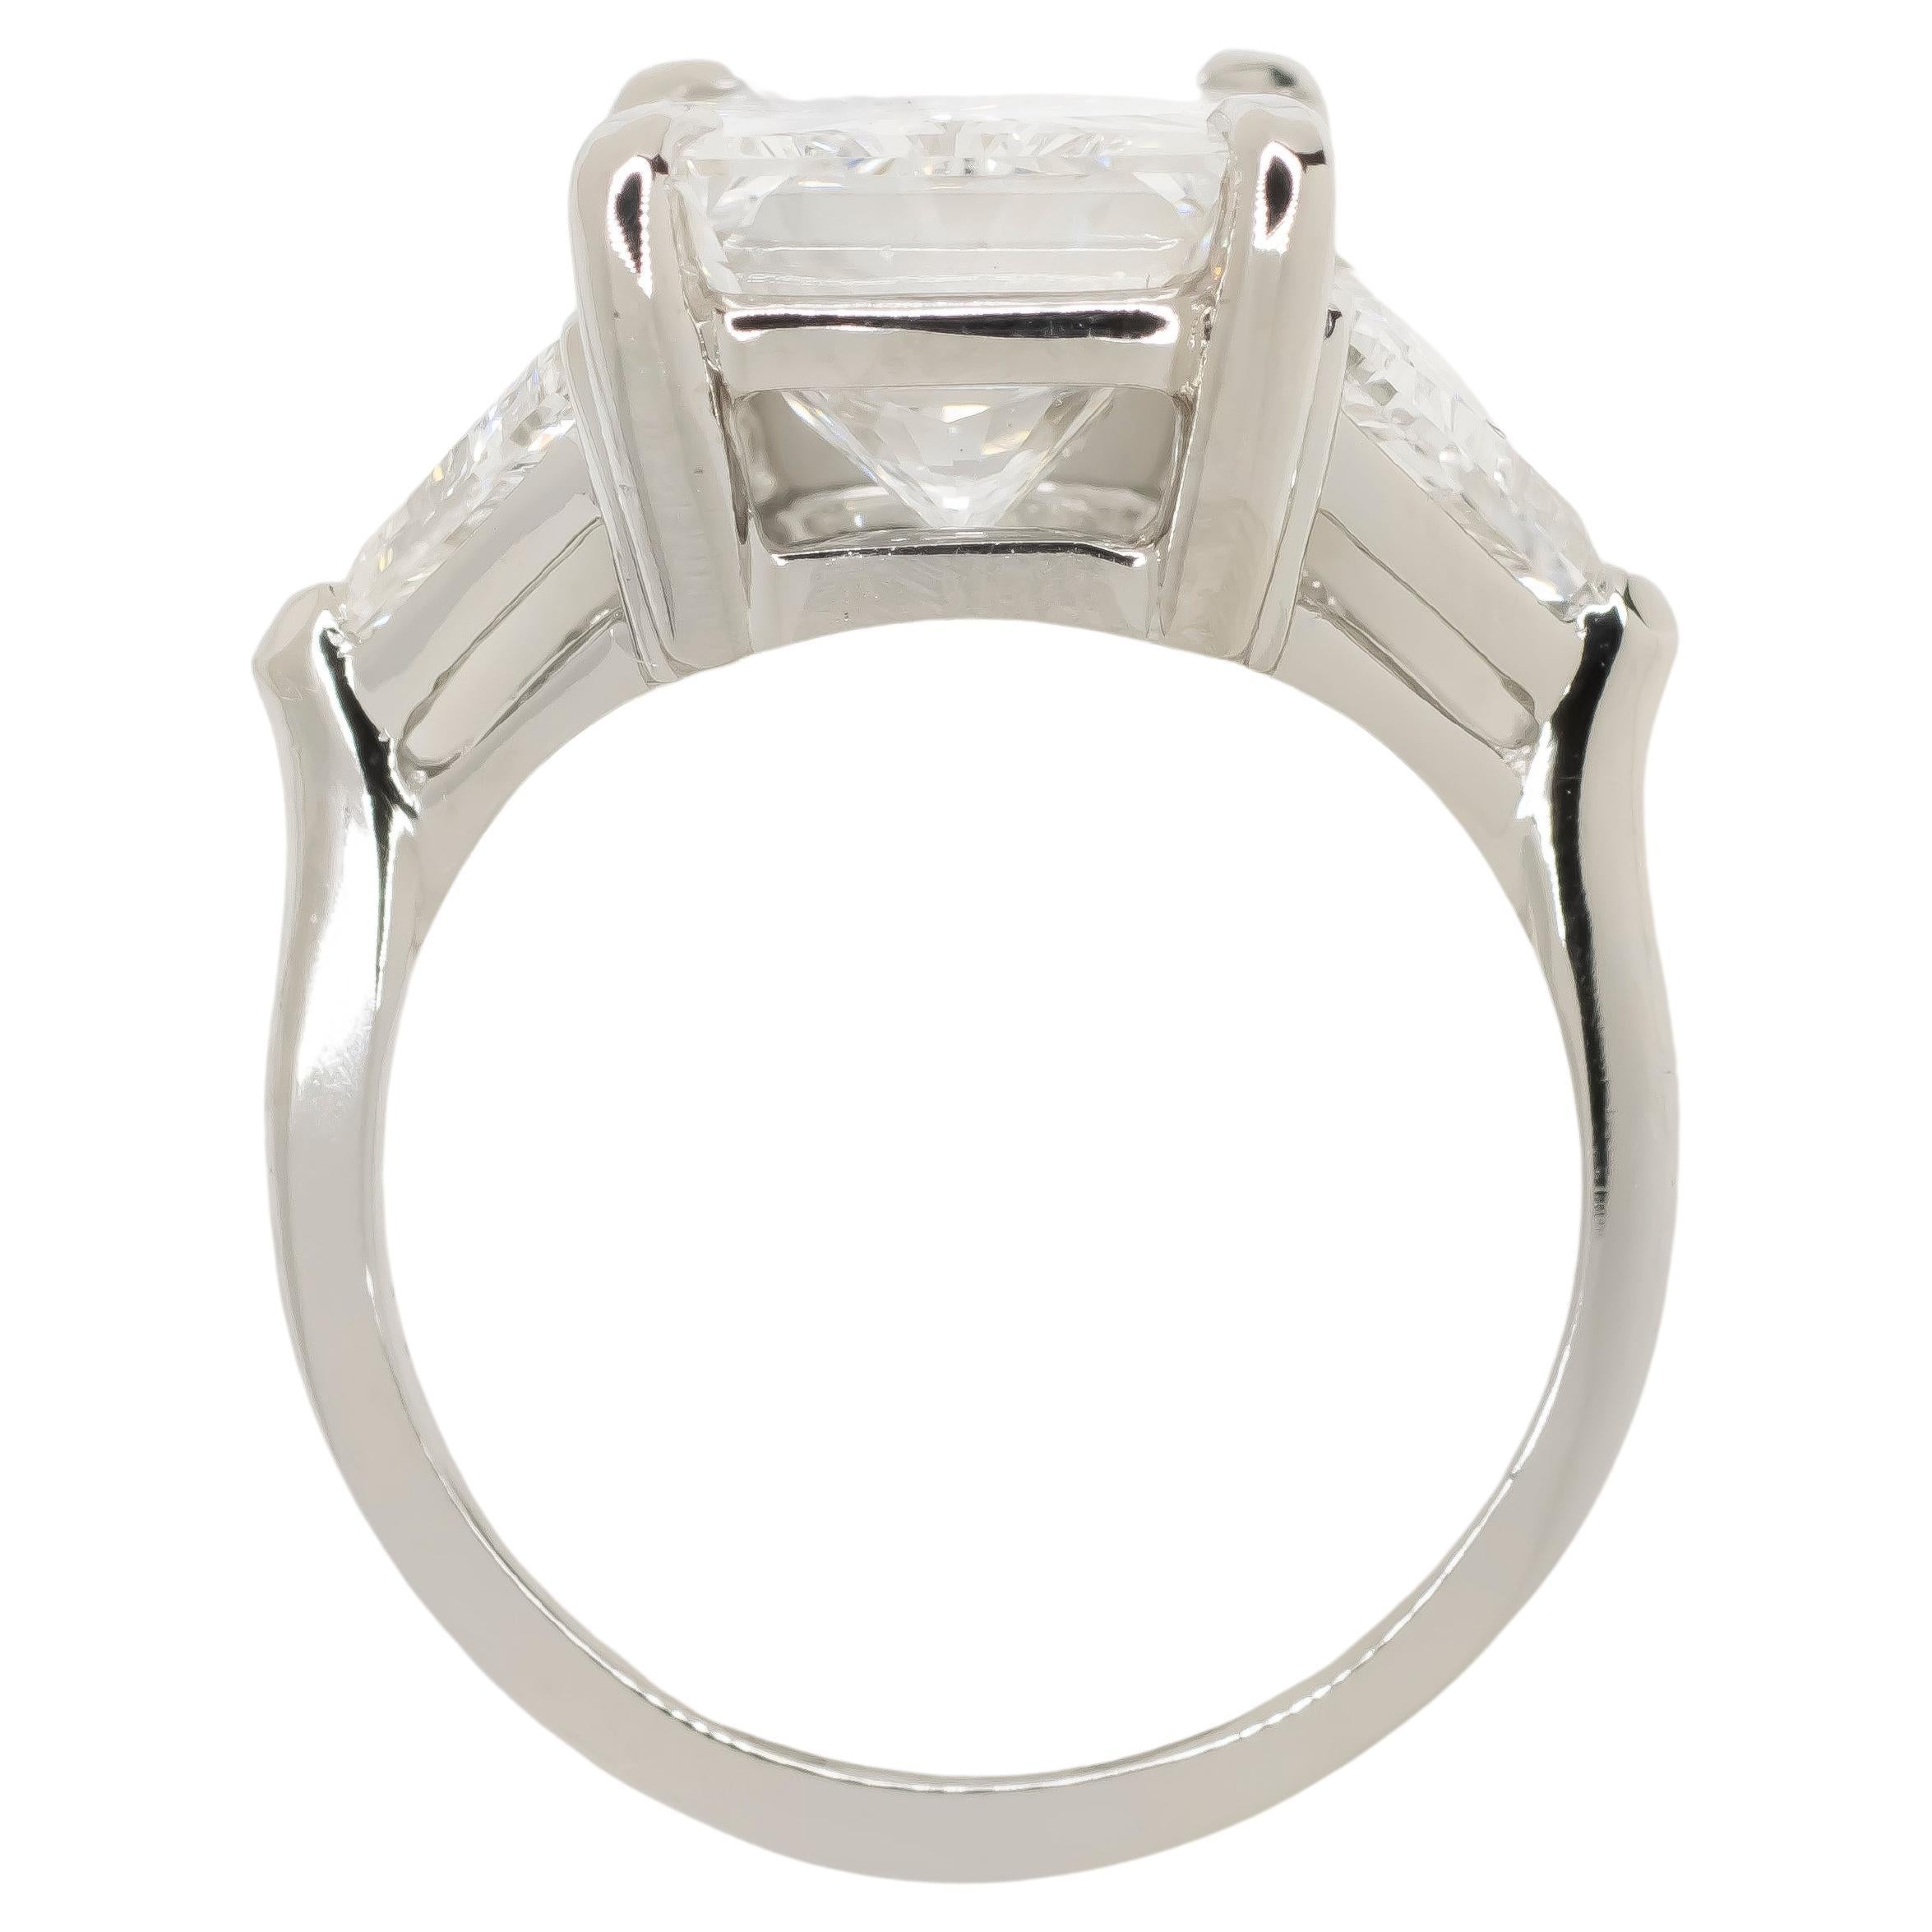 Exquisite in every detail, this captivating ring features a radiant-cut GIA-certified diamond at its center, weighing 5 carats. Graded as D color and Flawless clarity by GIA, this diamond is a stunning embodiment of brilliance and purity. The ring